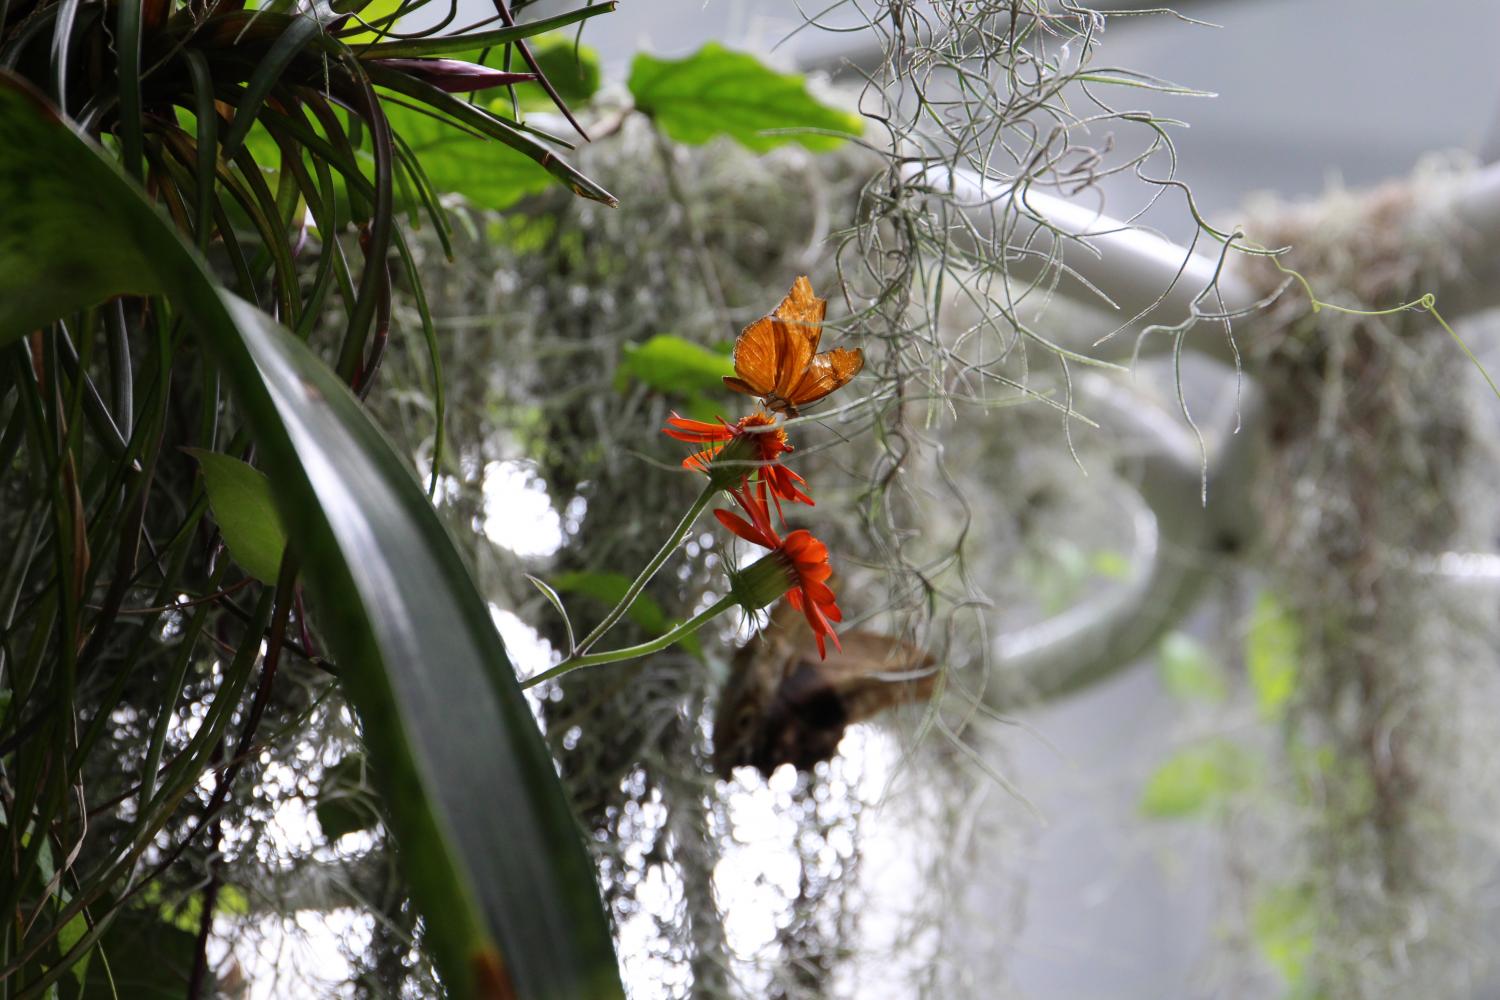 In the Rainforest, around 250 spring butterflies are set free to roam throughout the four-story glass structure. 